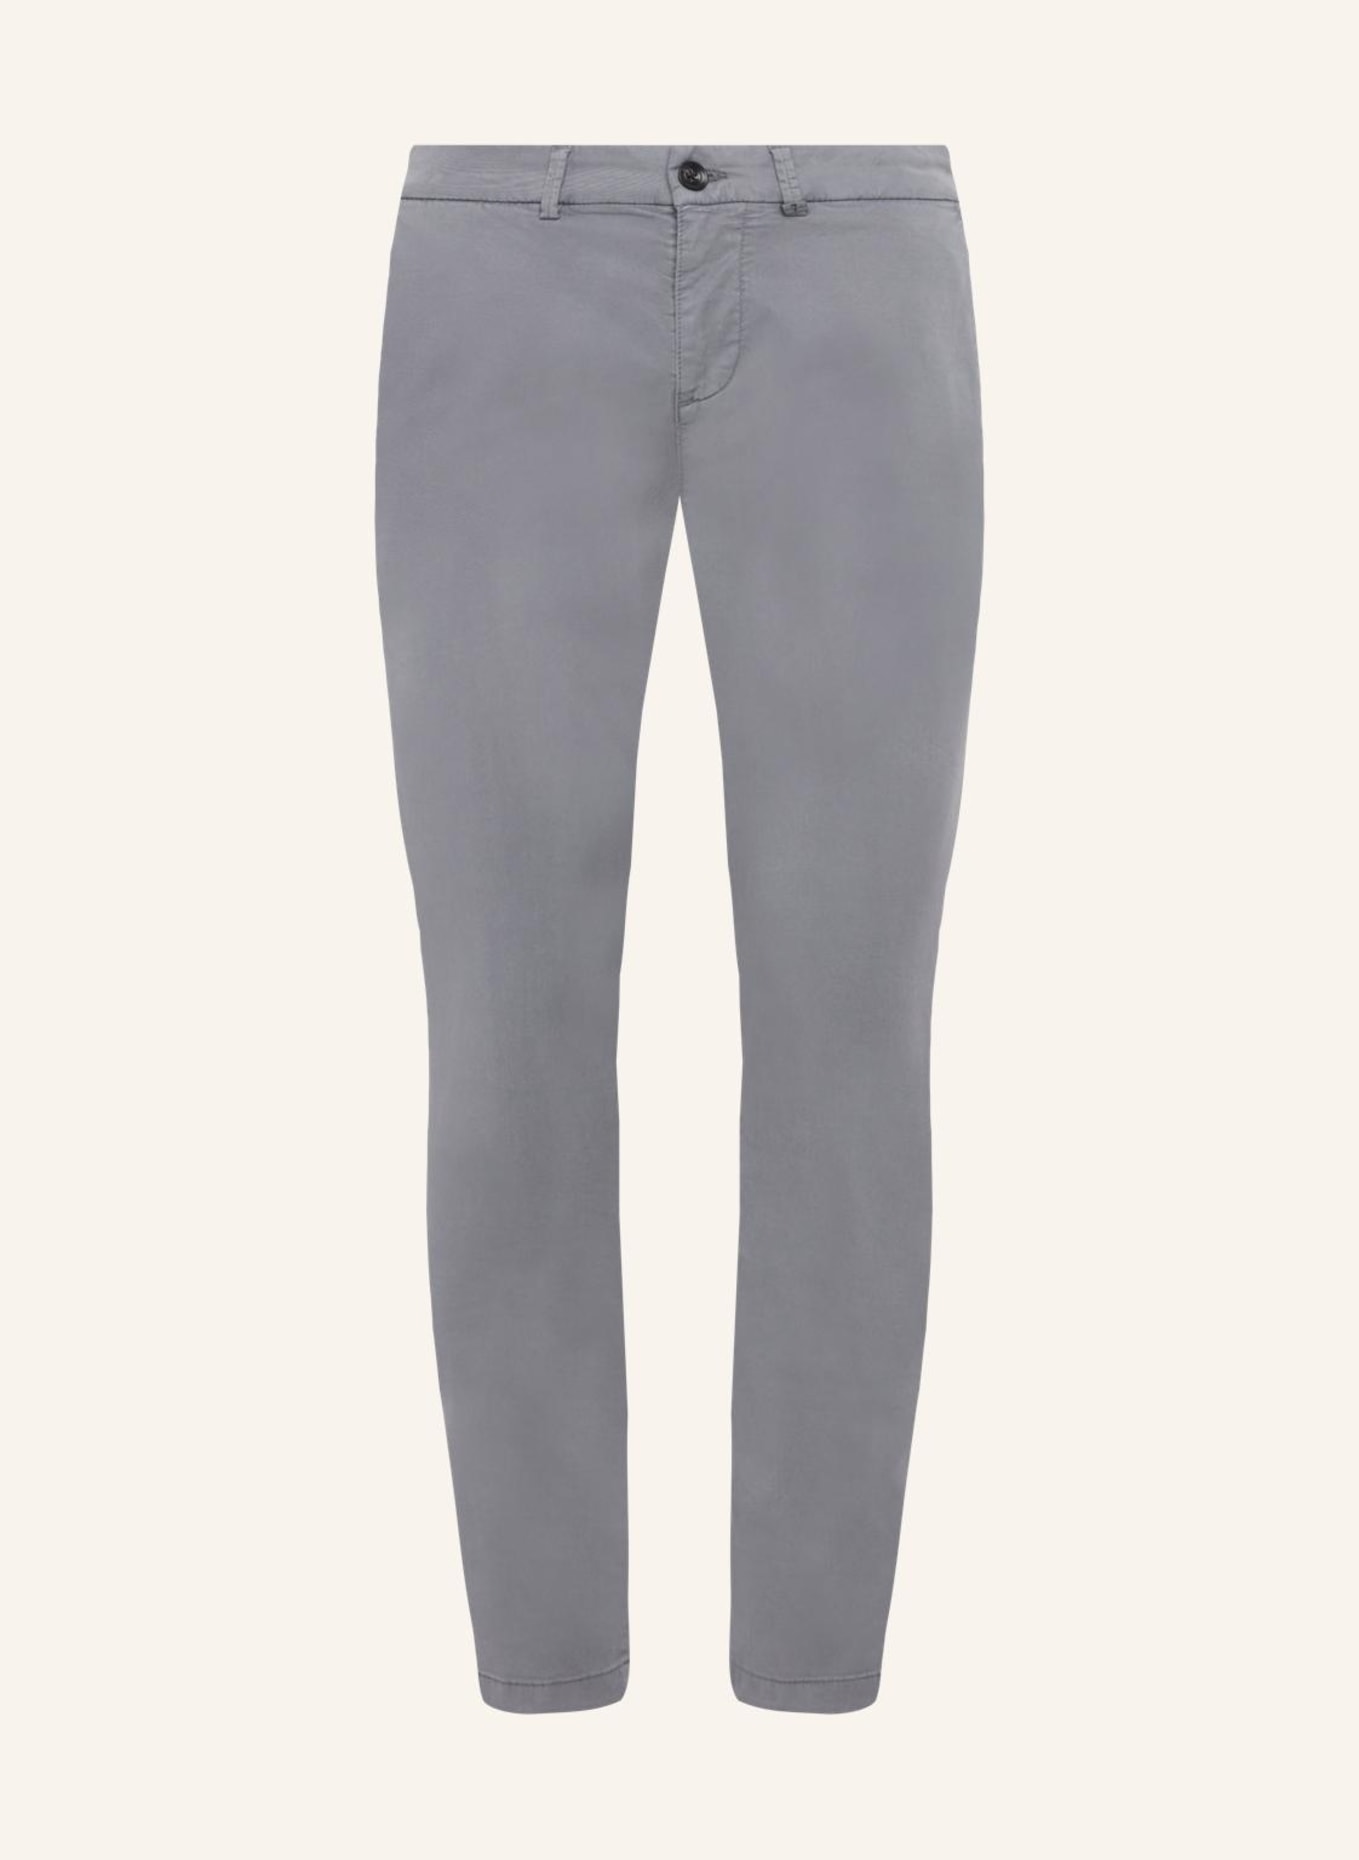 7 for all mankind SLIMMY CHINO TAPERED Pants, Farbe: BLAU (Bild 1)